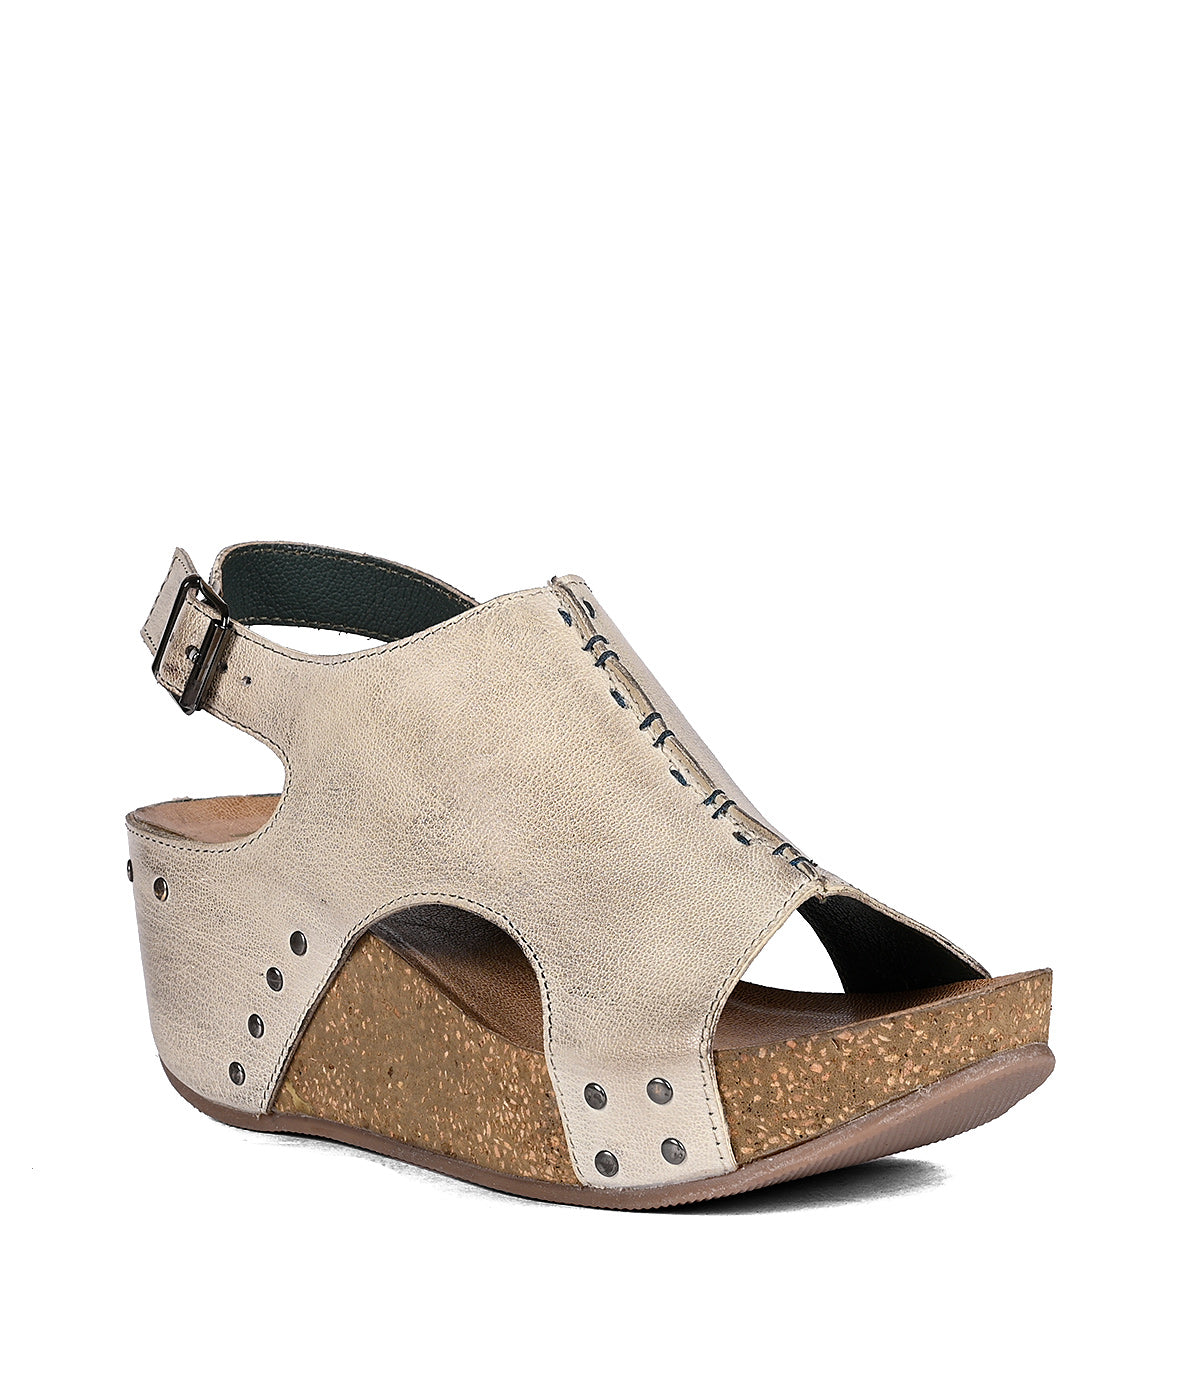 A beige full-grain leather wedge sandal with an ankle strap and decorative perforations along the side, displayed against a white background by Roan.